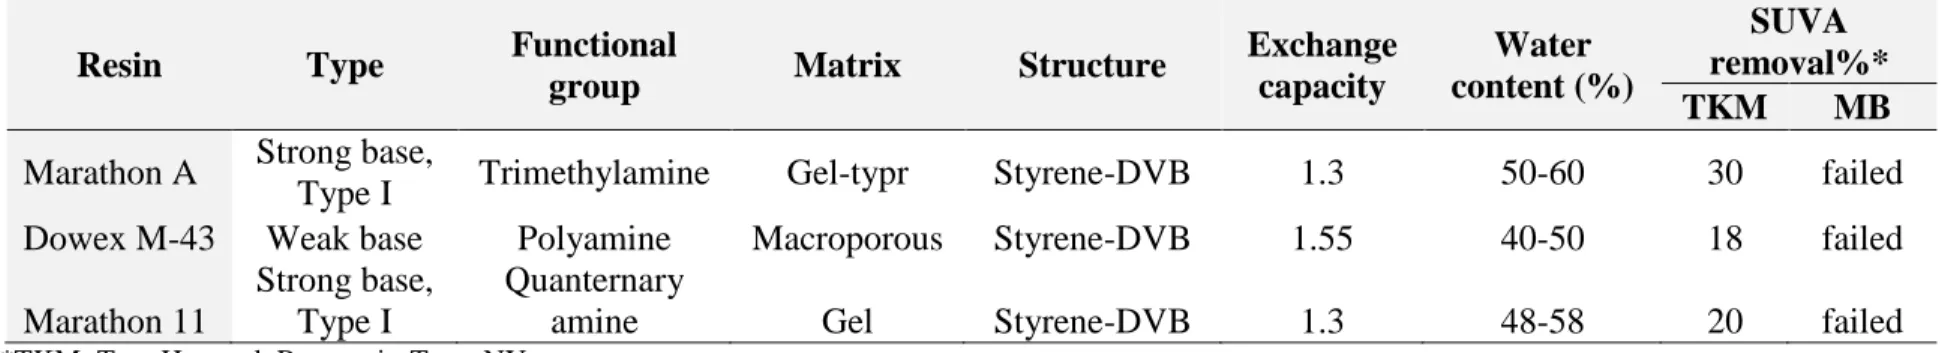 Table 2.7: Anion exchange resins studied by Tan et al. (2005) and Tan, and Kilduff (2007)  